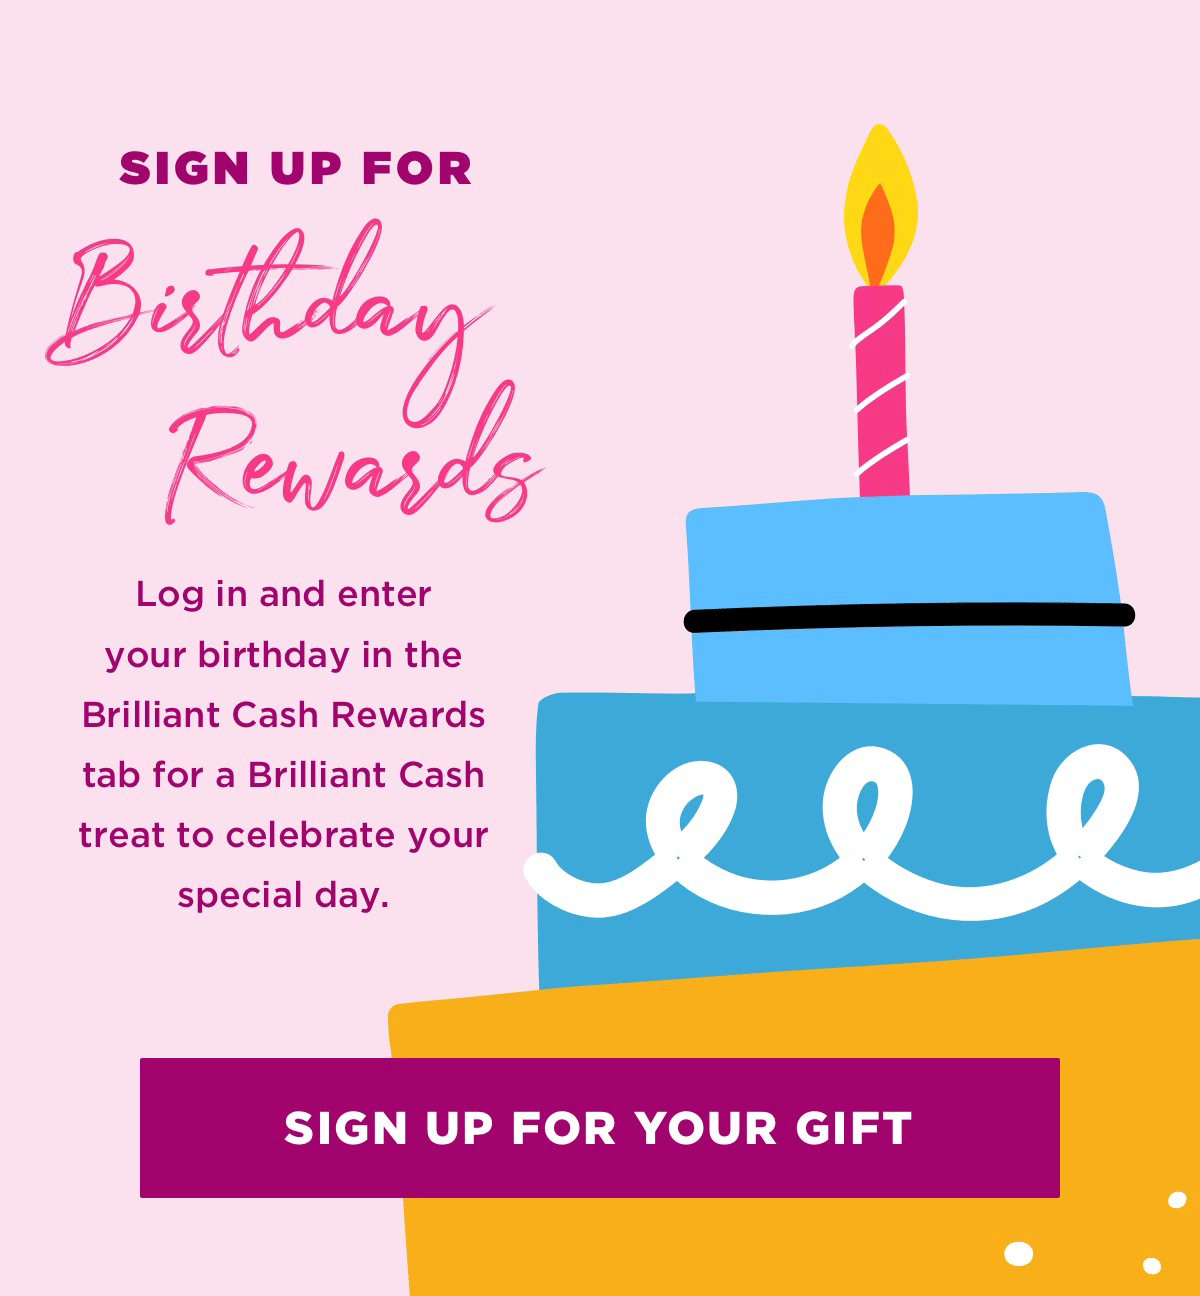 Log in and enter your birthday in the Brilliant Cash Rewards tab for a Brilliant Cash treat to celebrate your special day.